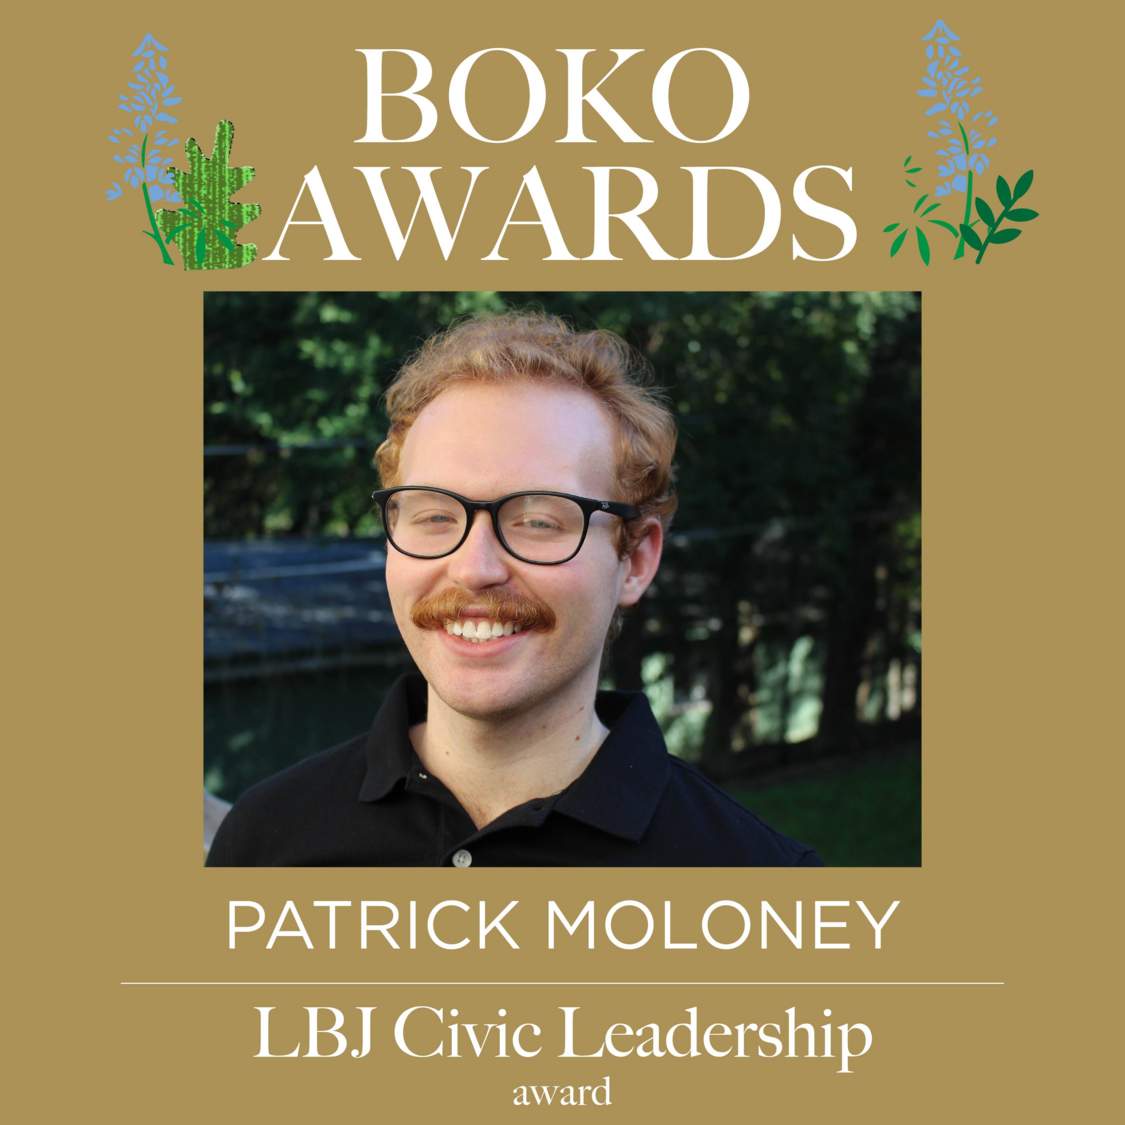 Picture of text displaying that Patrick Moloney won the LBJ Civic Leadership award.